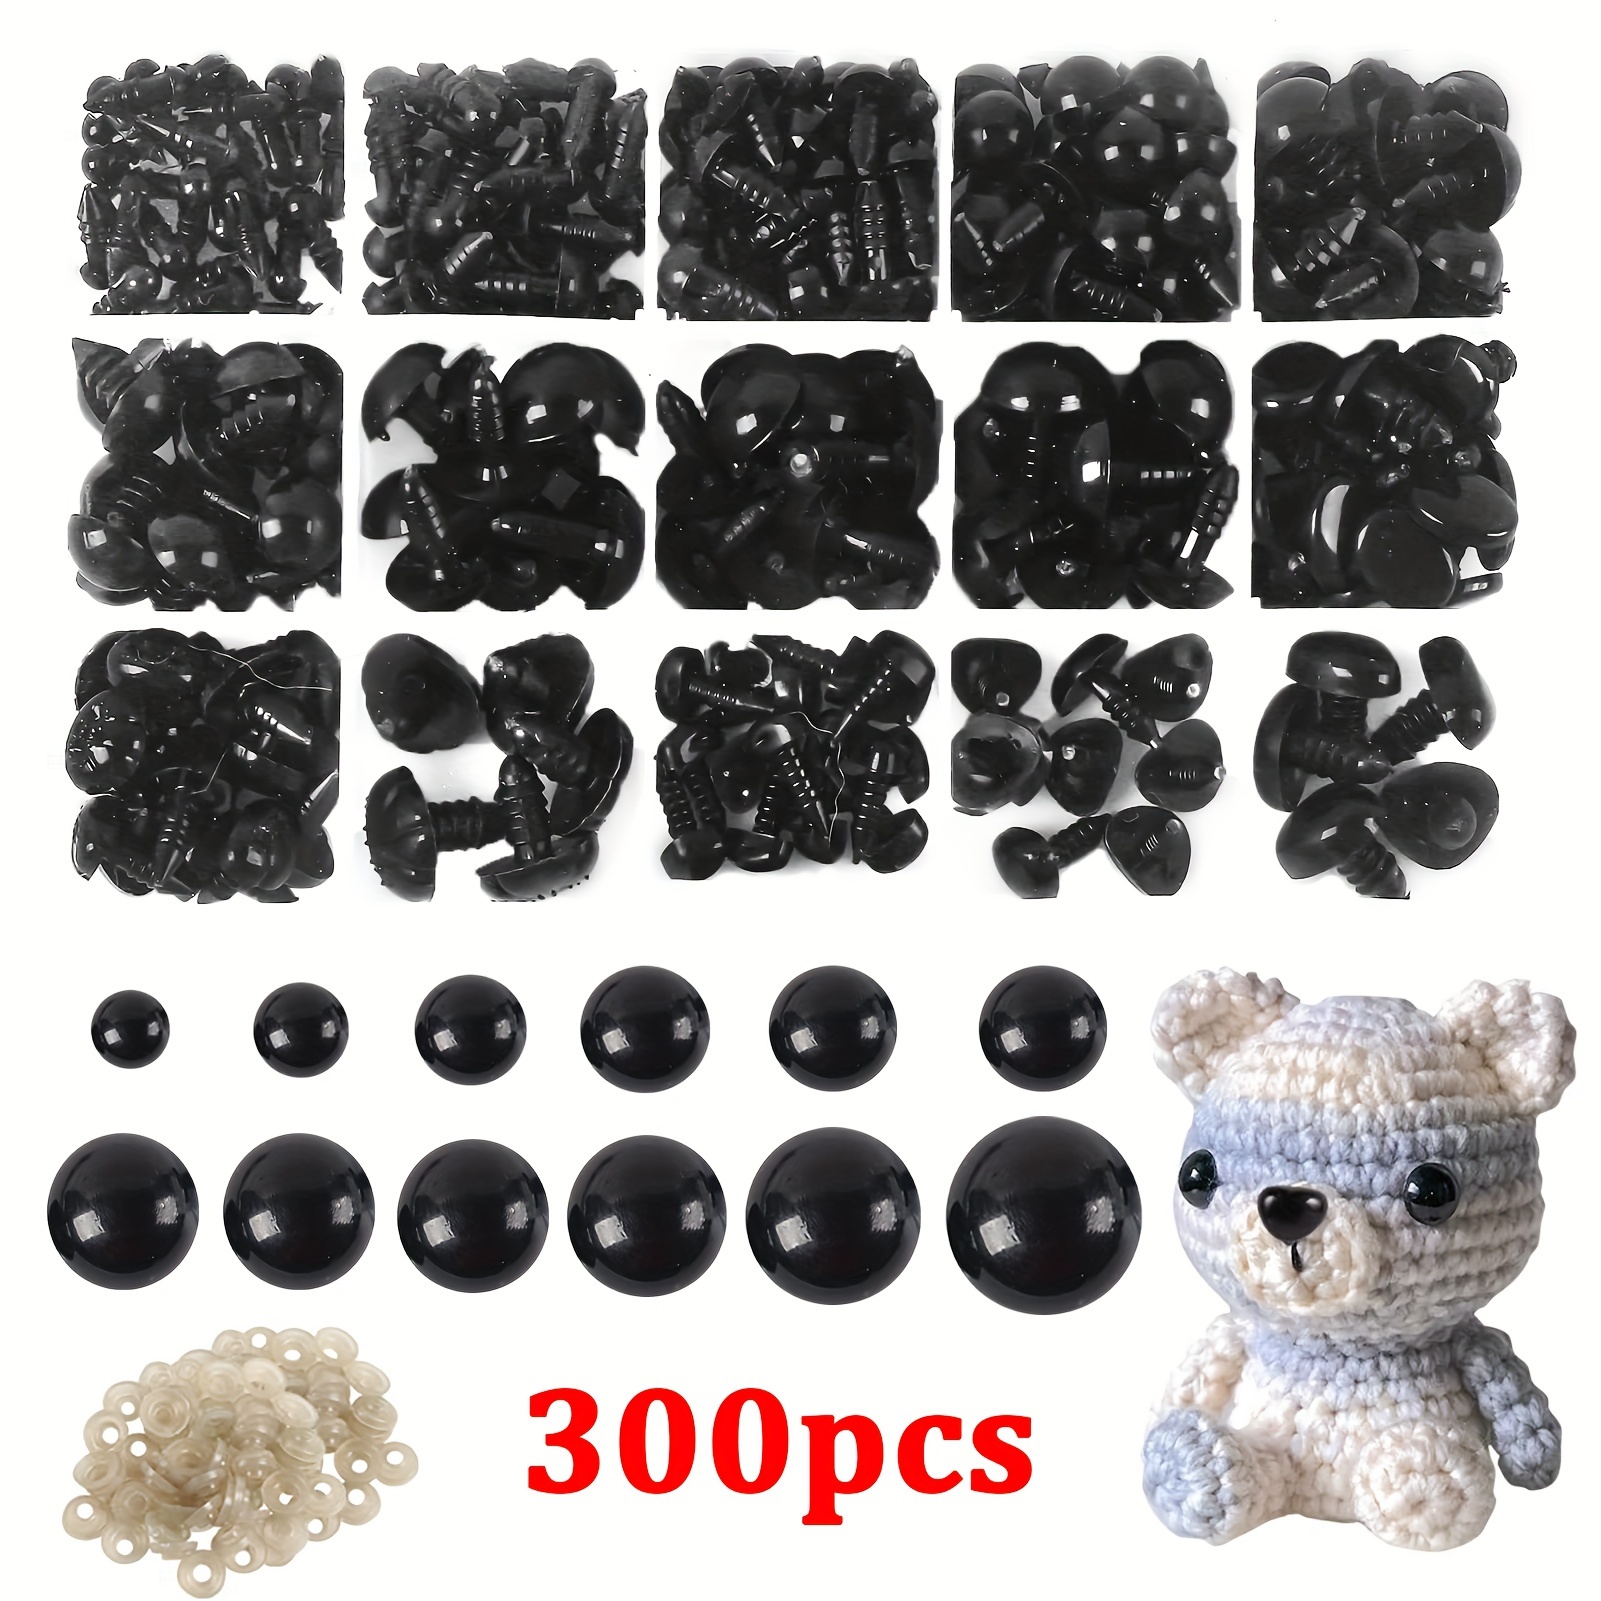 

18-300pcs Brighten Up Your Amigurumi With Safety Eyes For Crochet Teddy , Dolls & Plush Animals Various Sizes Available